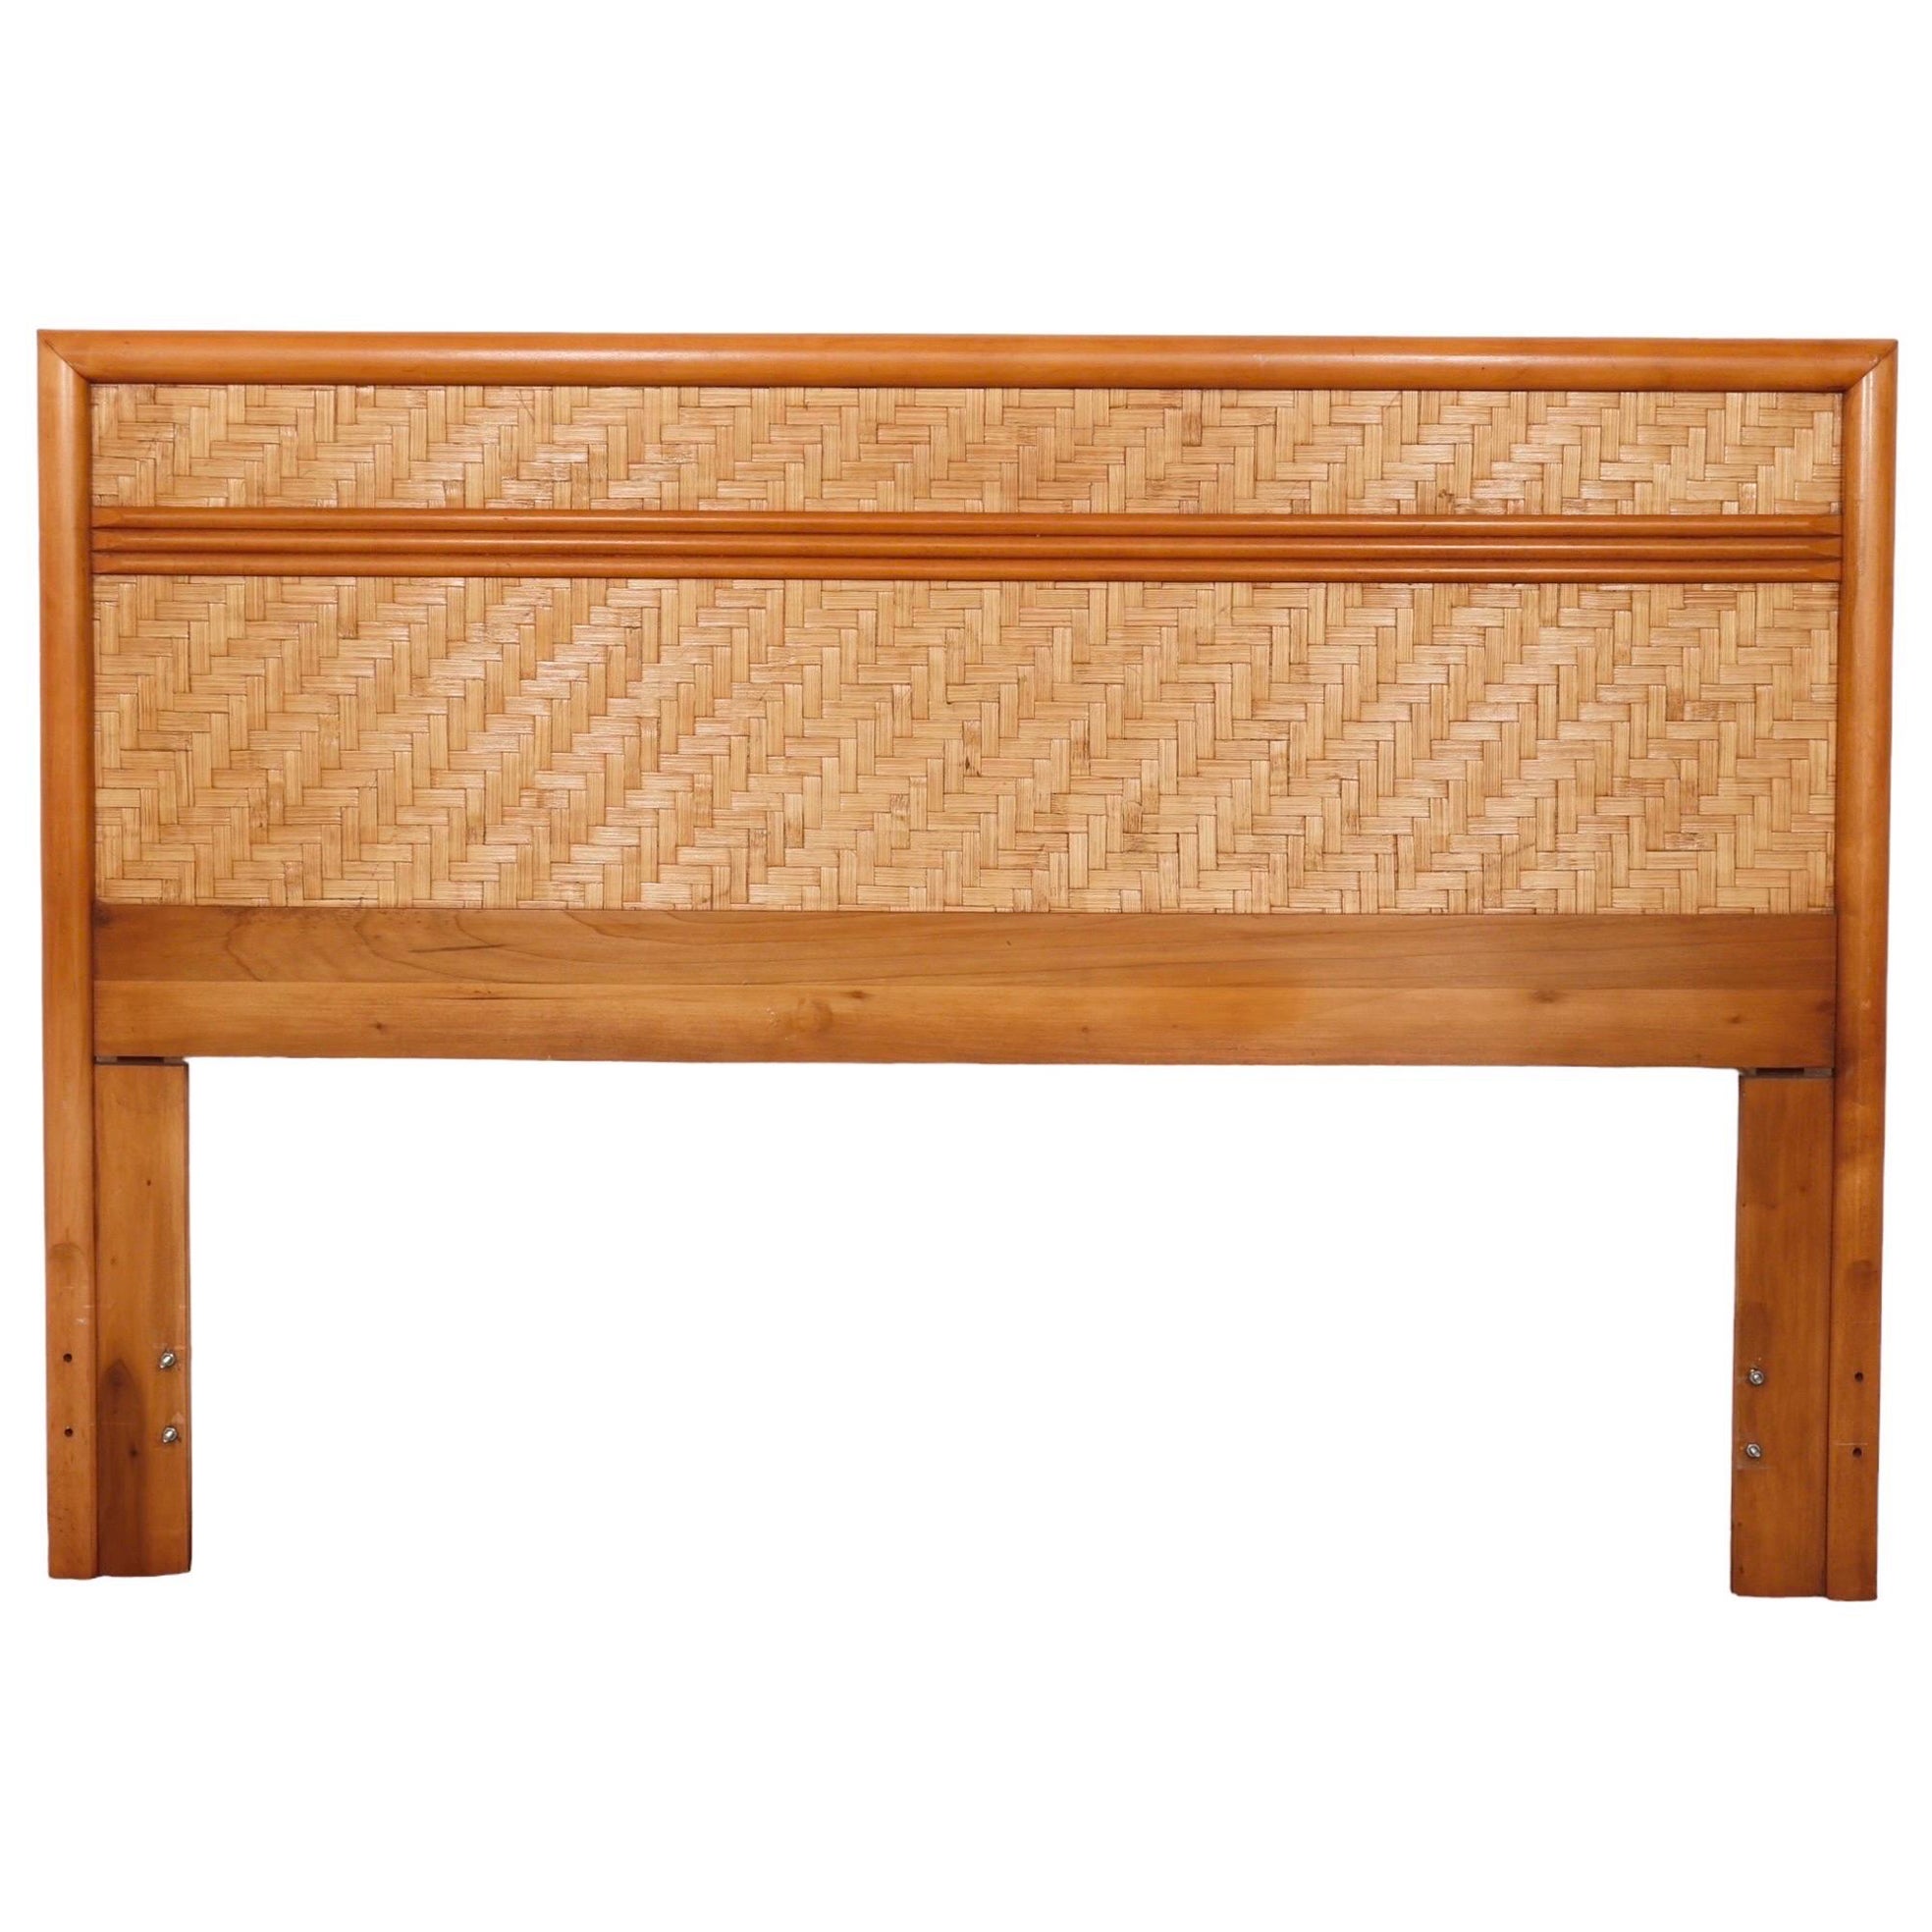 Queen Rattan Headboard by Dixie For Sale